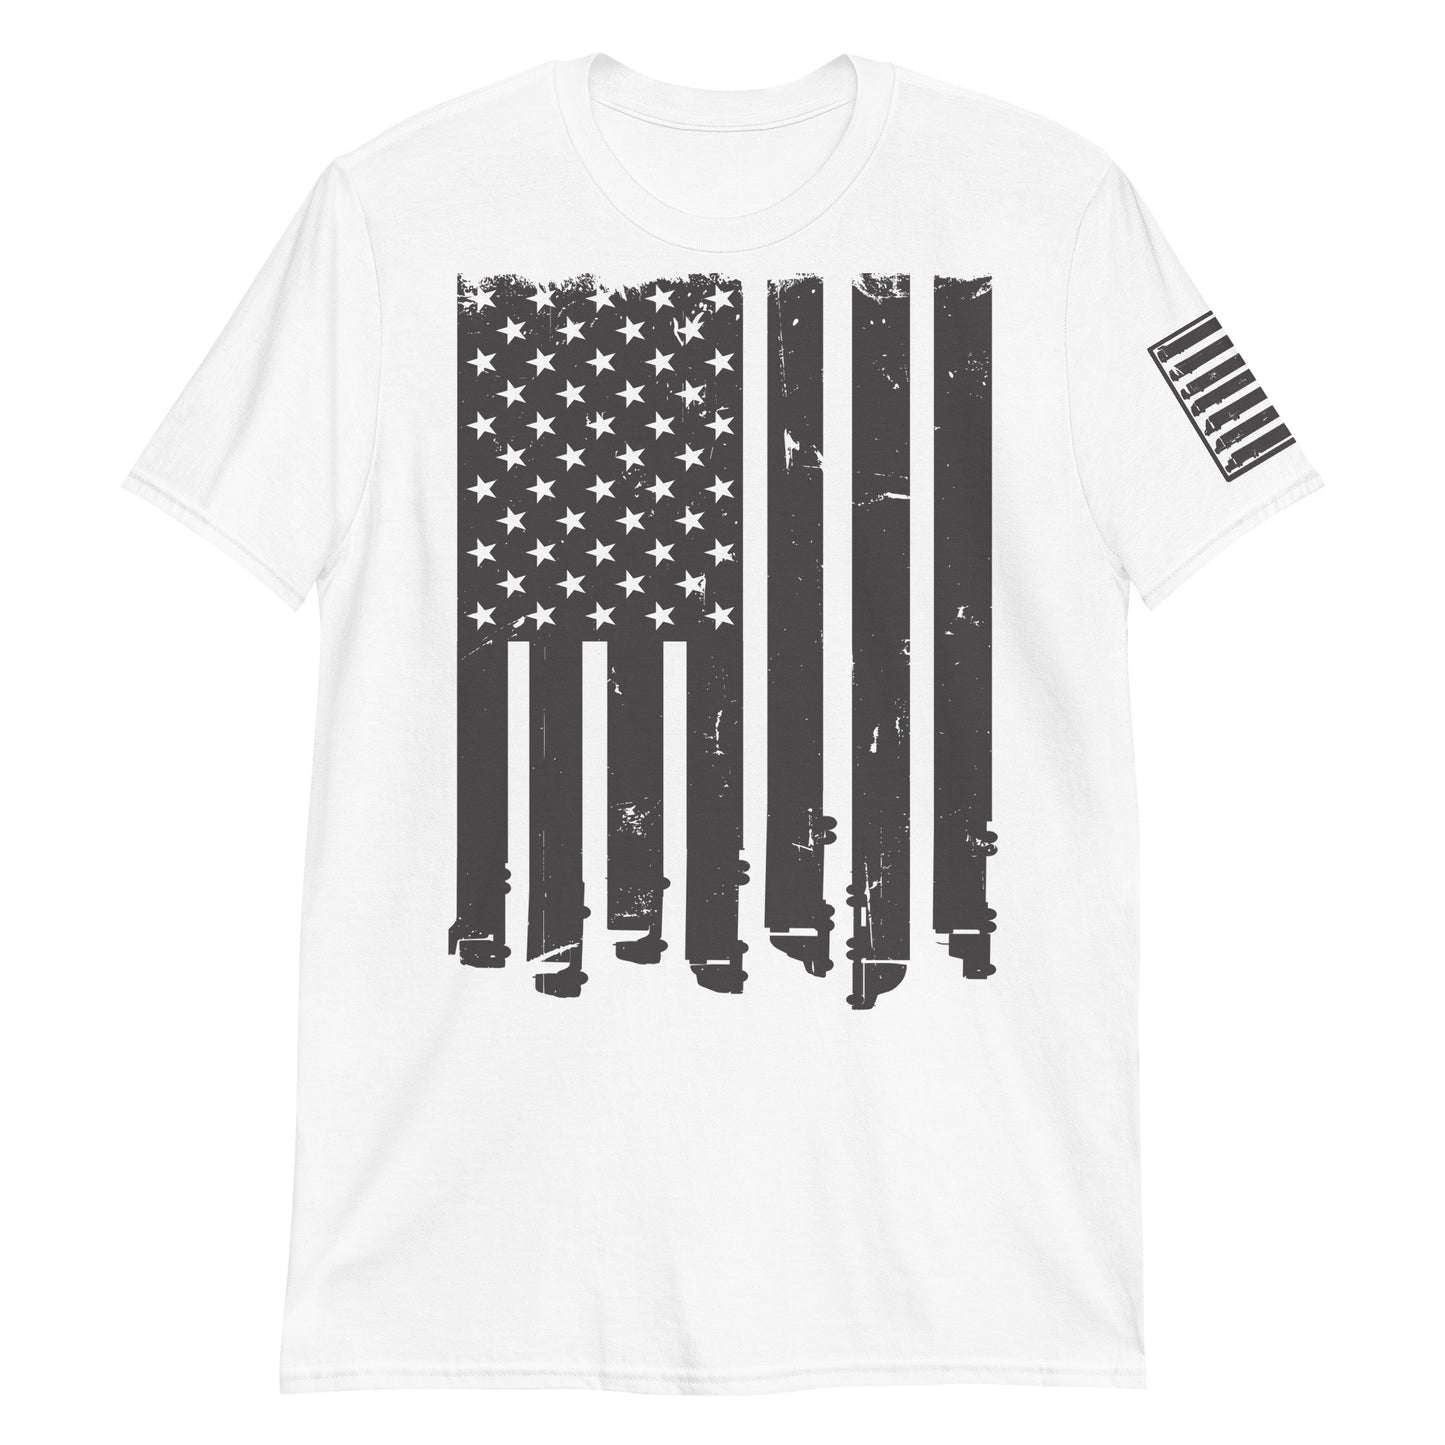 Hauling Freedom' - Image of a trucker t-shirt featuring an American flag design with semi trucks as stripes on a white t shirt, symbolizing the freedom and pride of American truckers